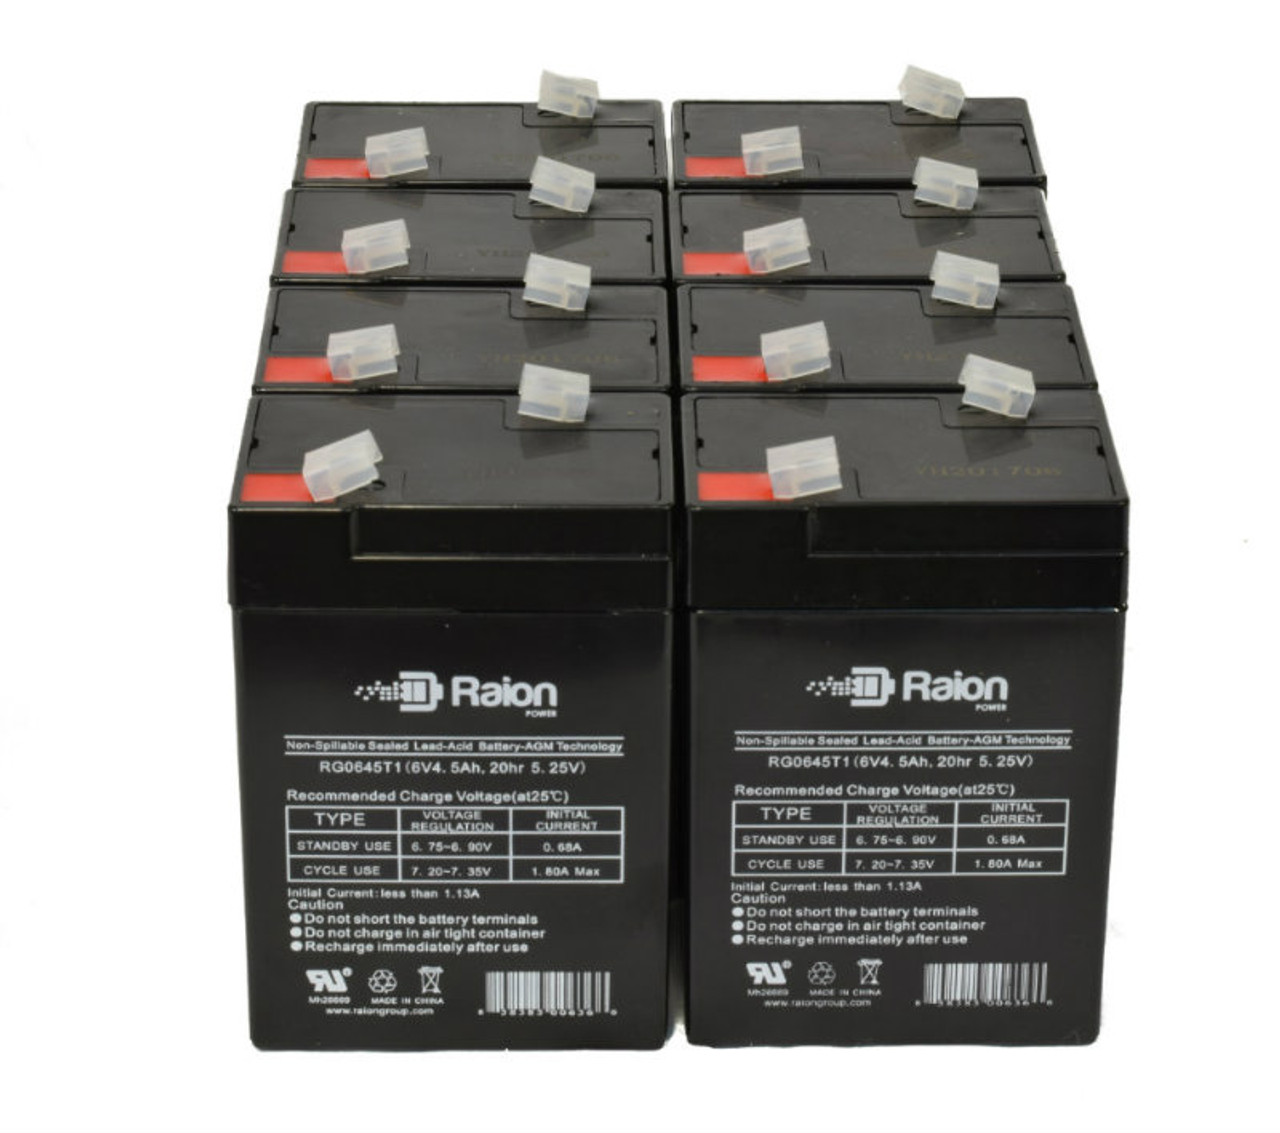 Raion Power 6V 4.5Ah Replacement Emergency Light Battery for Dual-Lite CVT3RB - 8 Pack